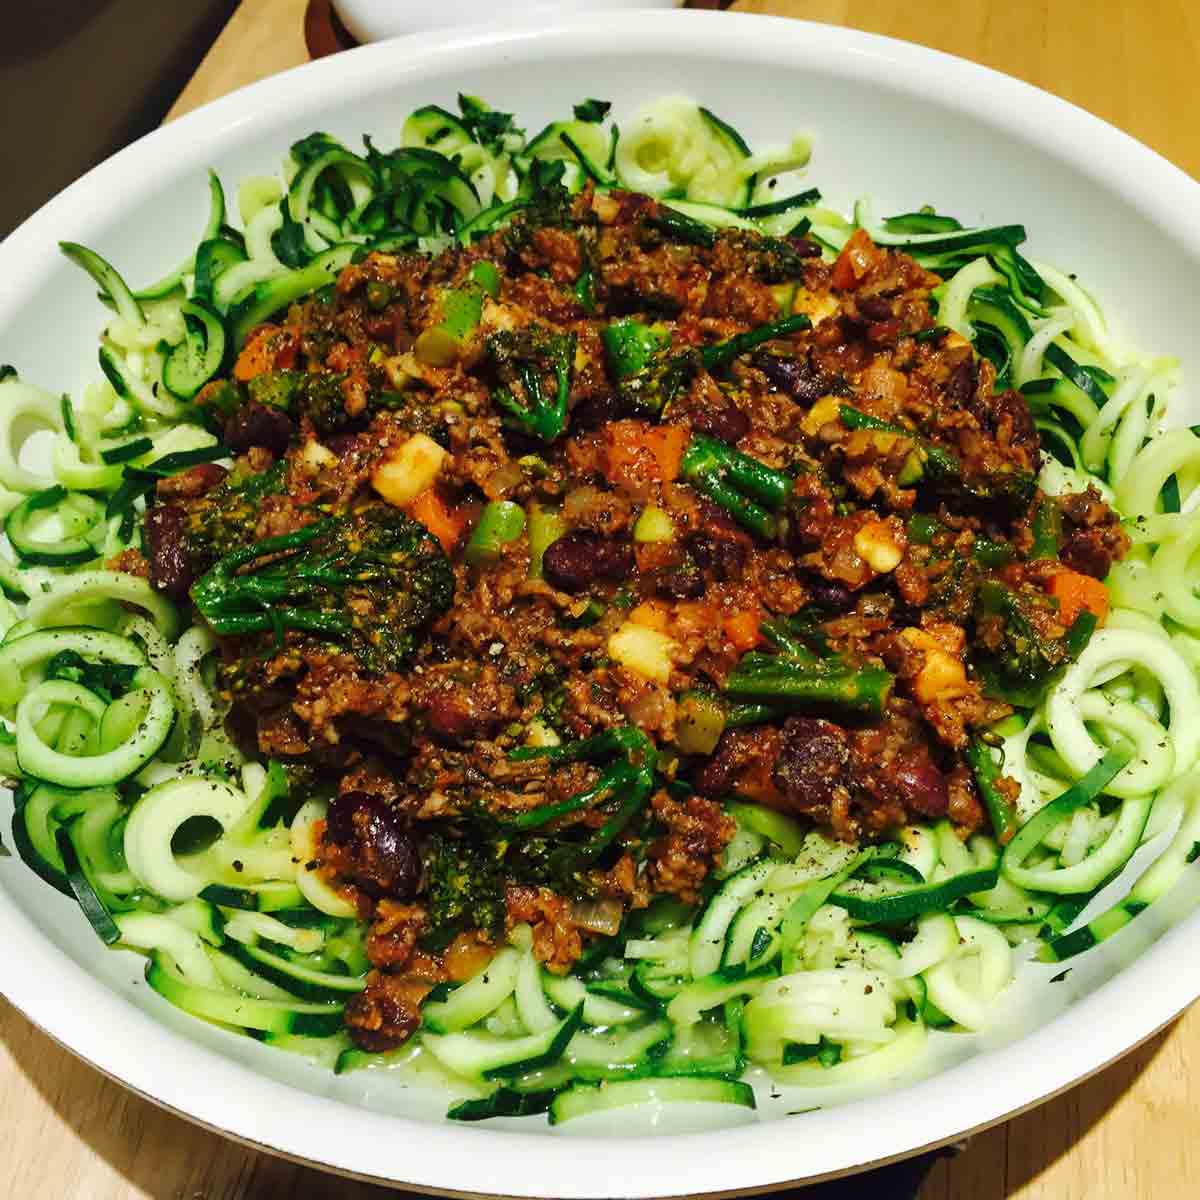 Spiralized zucchini pasta, in a white bowl, with sauce